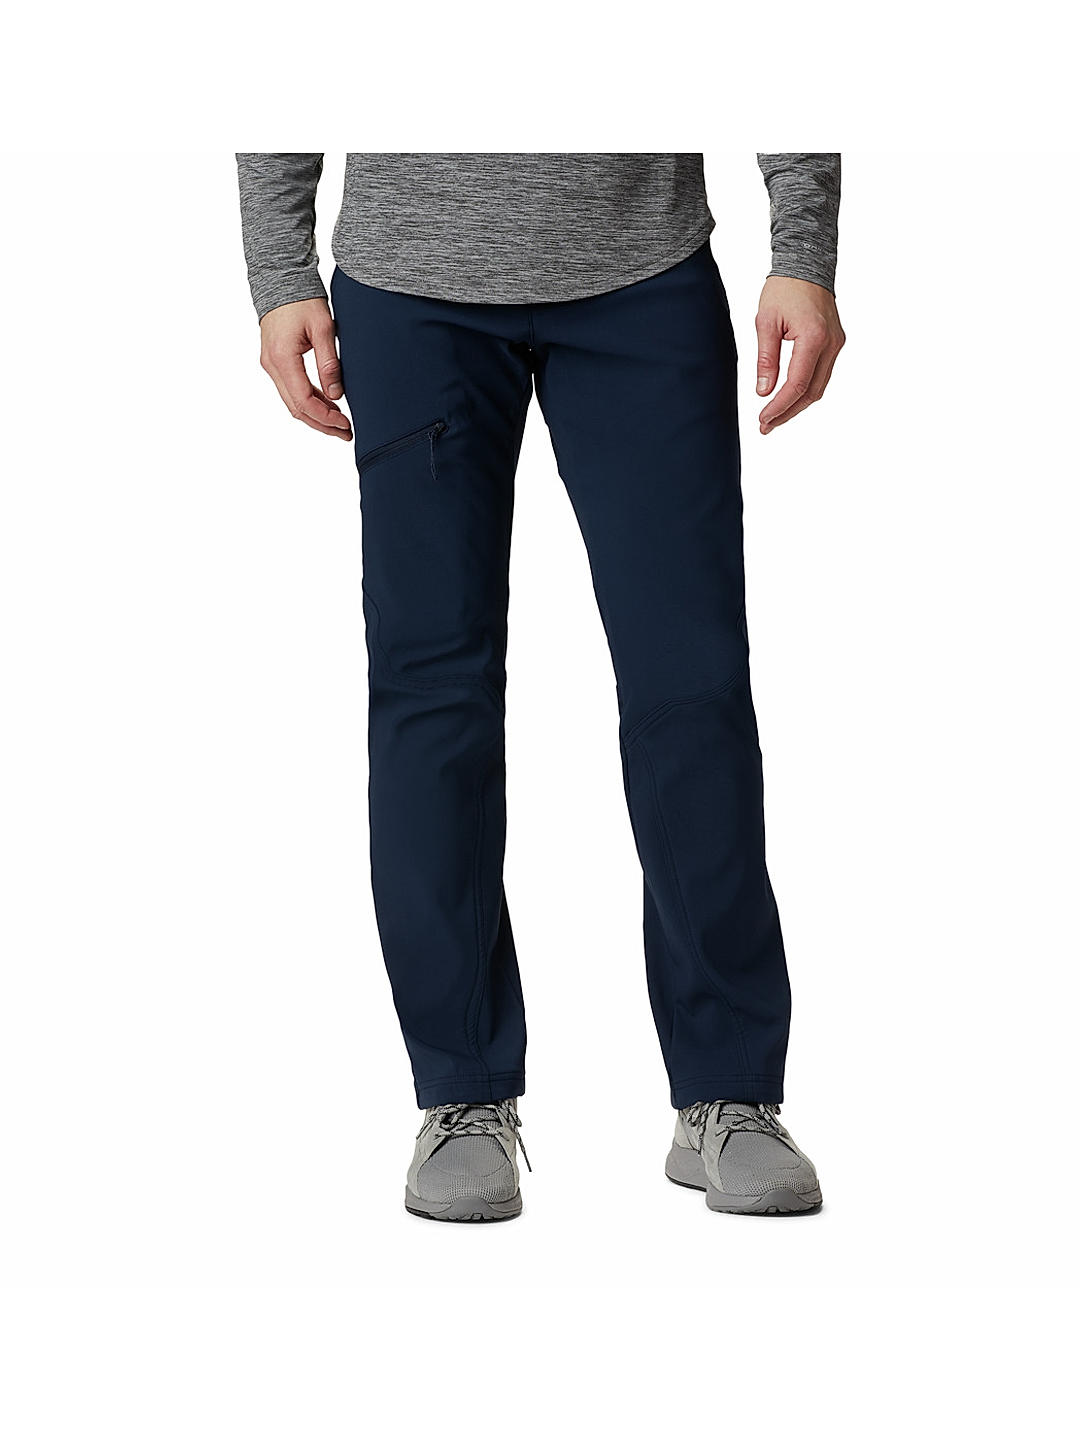 Buy Blue Triple Canyon Fall Hiking Pant for Men Online at Columbia